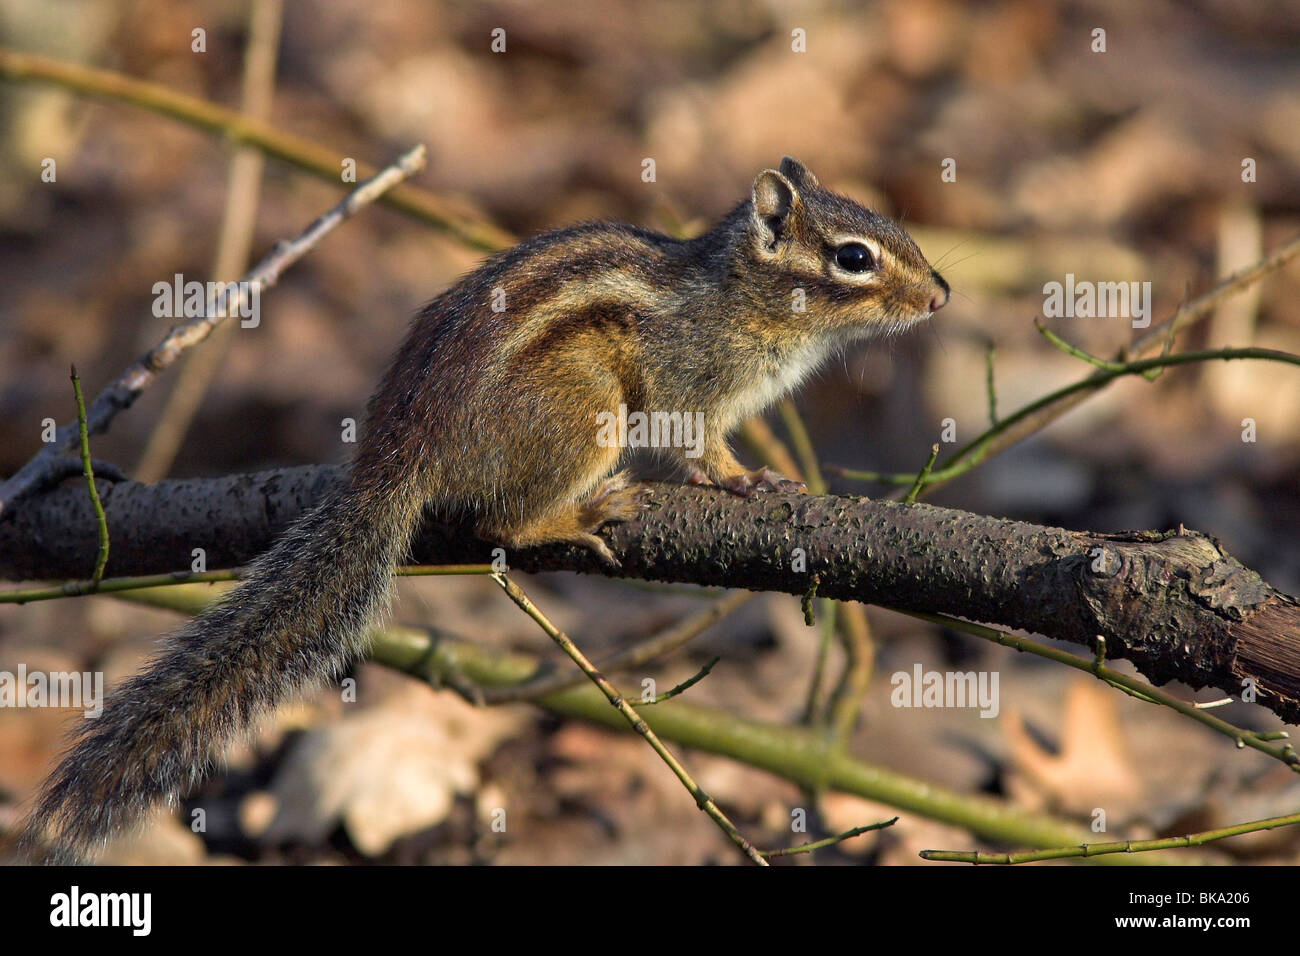 Siberian Chipmunk on a branch in a park Stock Photo